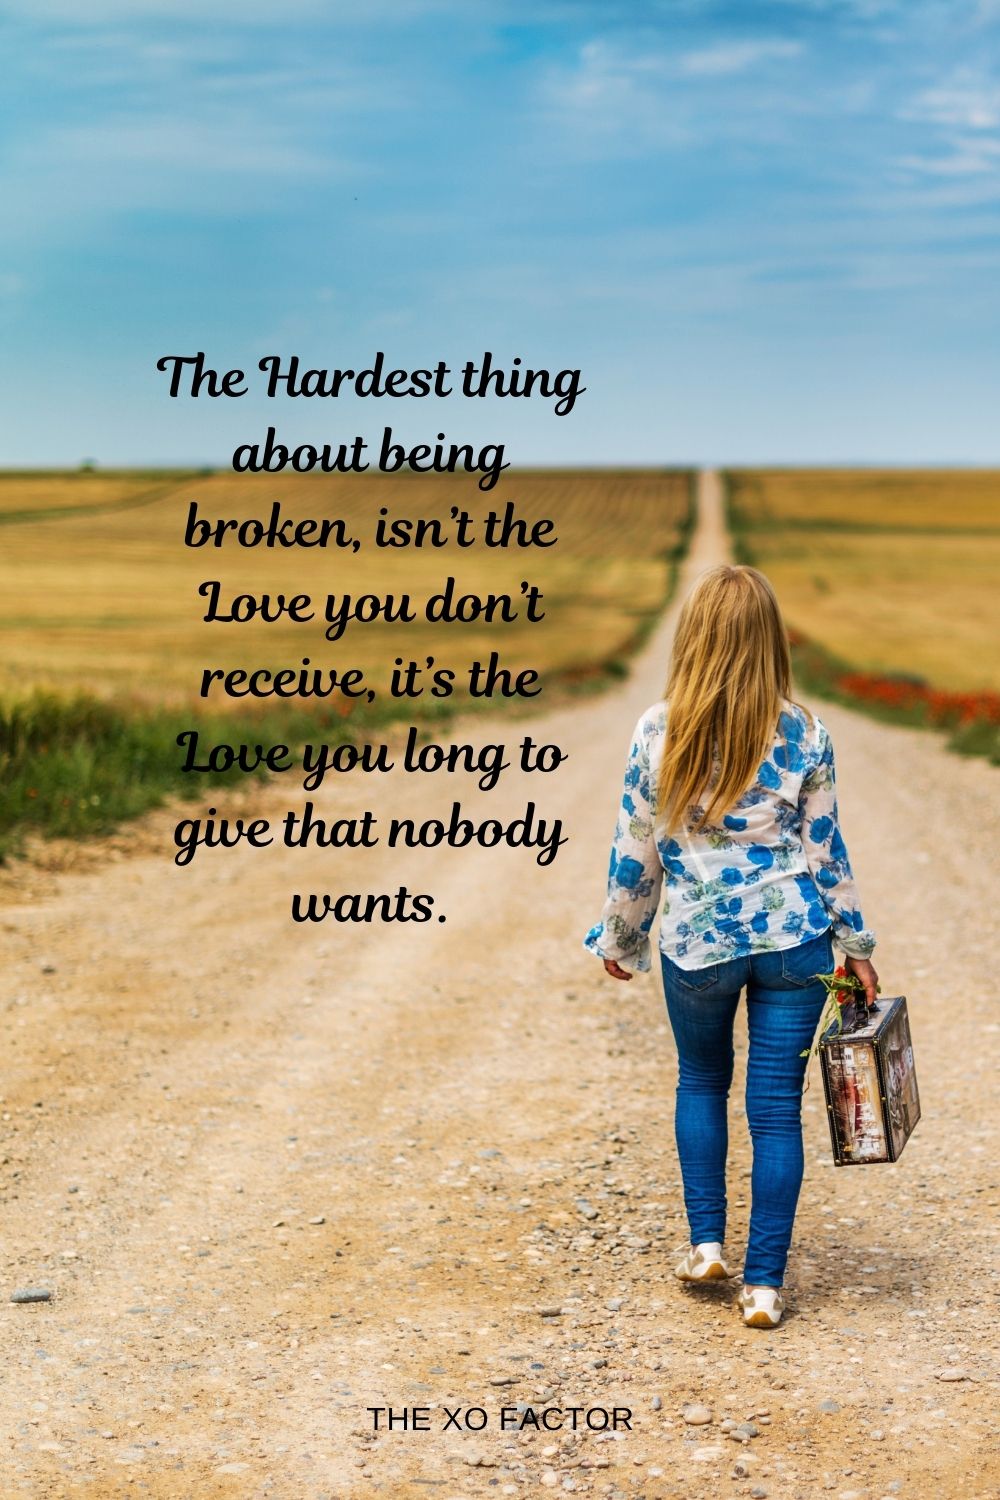 The Hardest thing about being broken, isn’t the Love you don’t receive, it’s the Love you long to give that nobody wants.